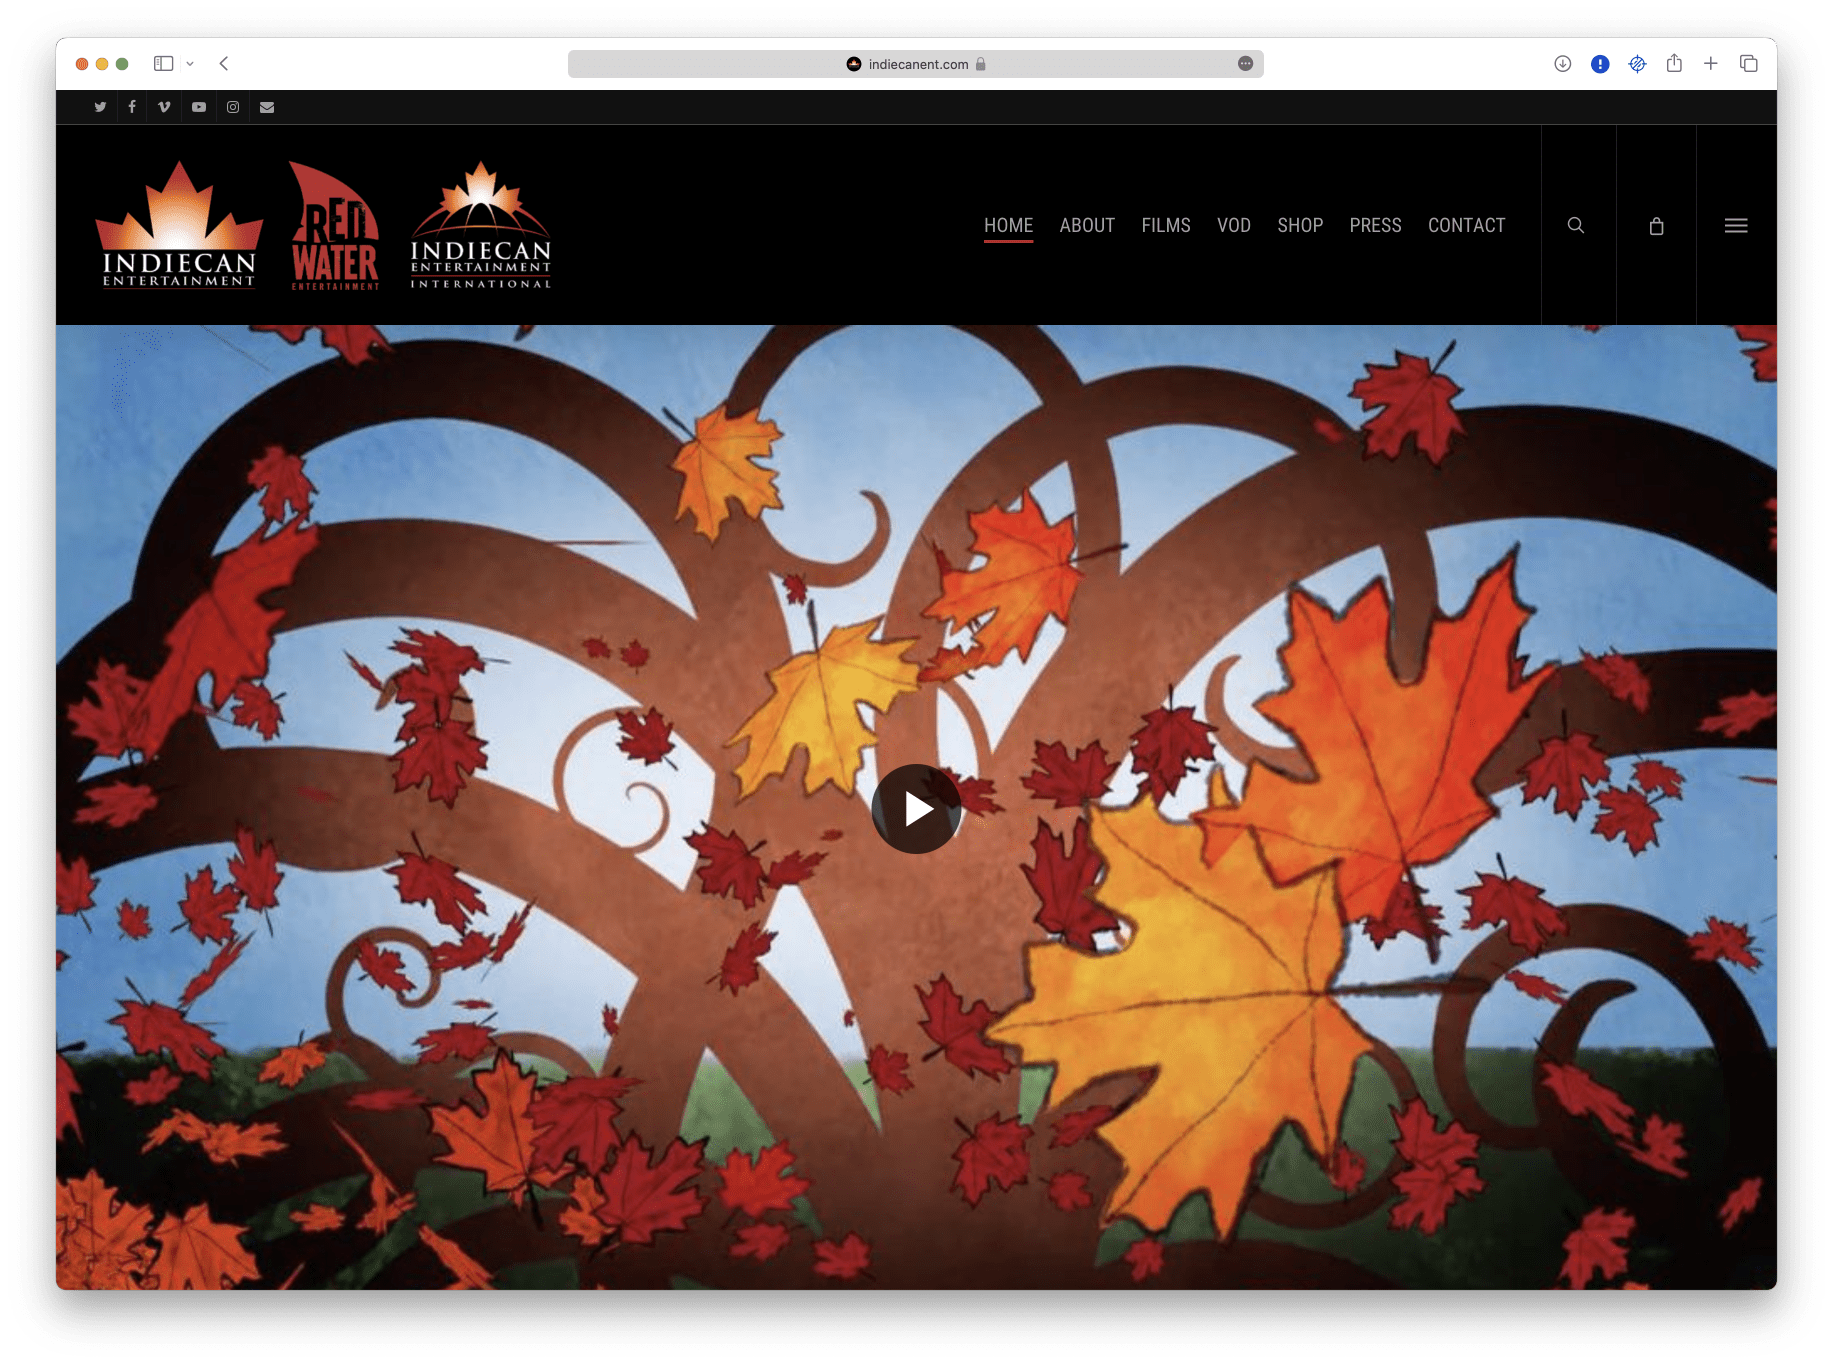 A website with an image of a tree and leaves.